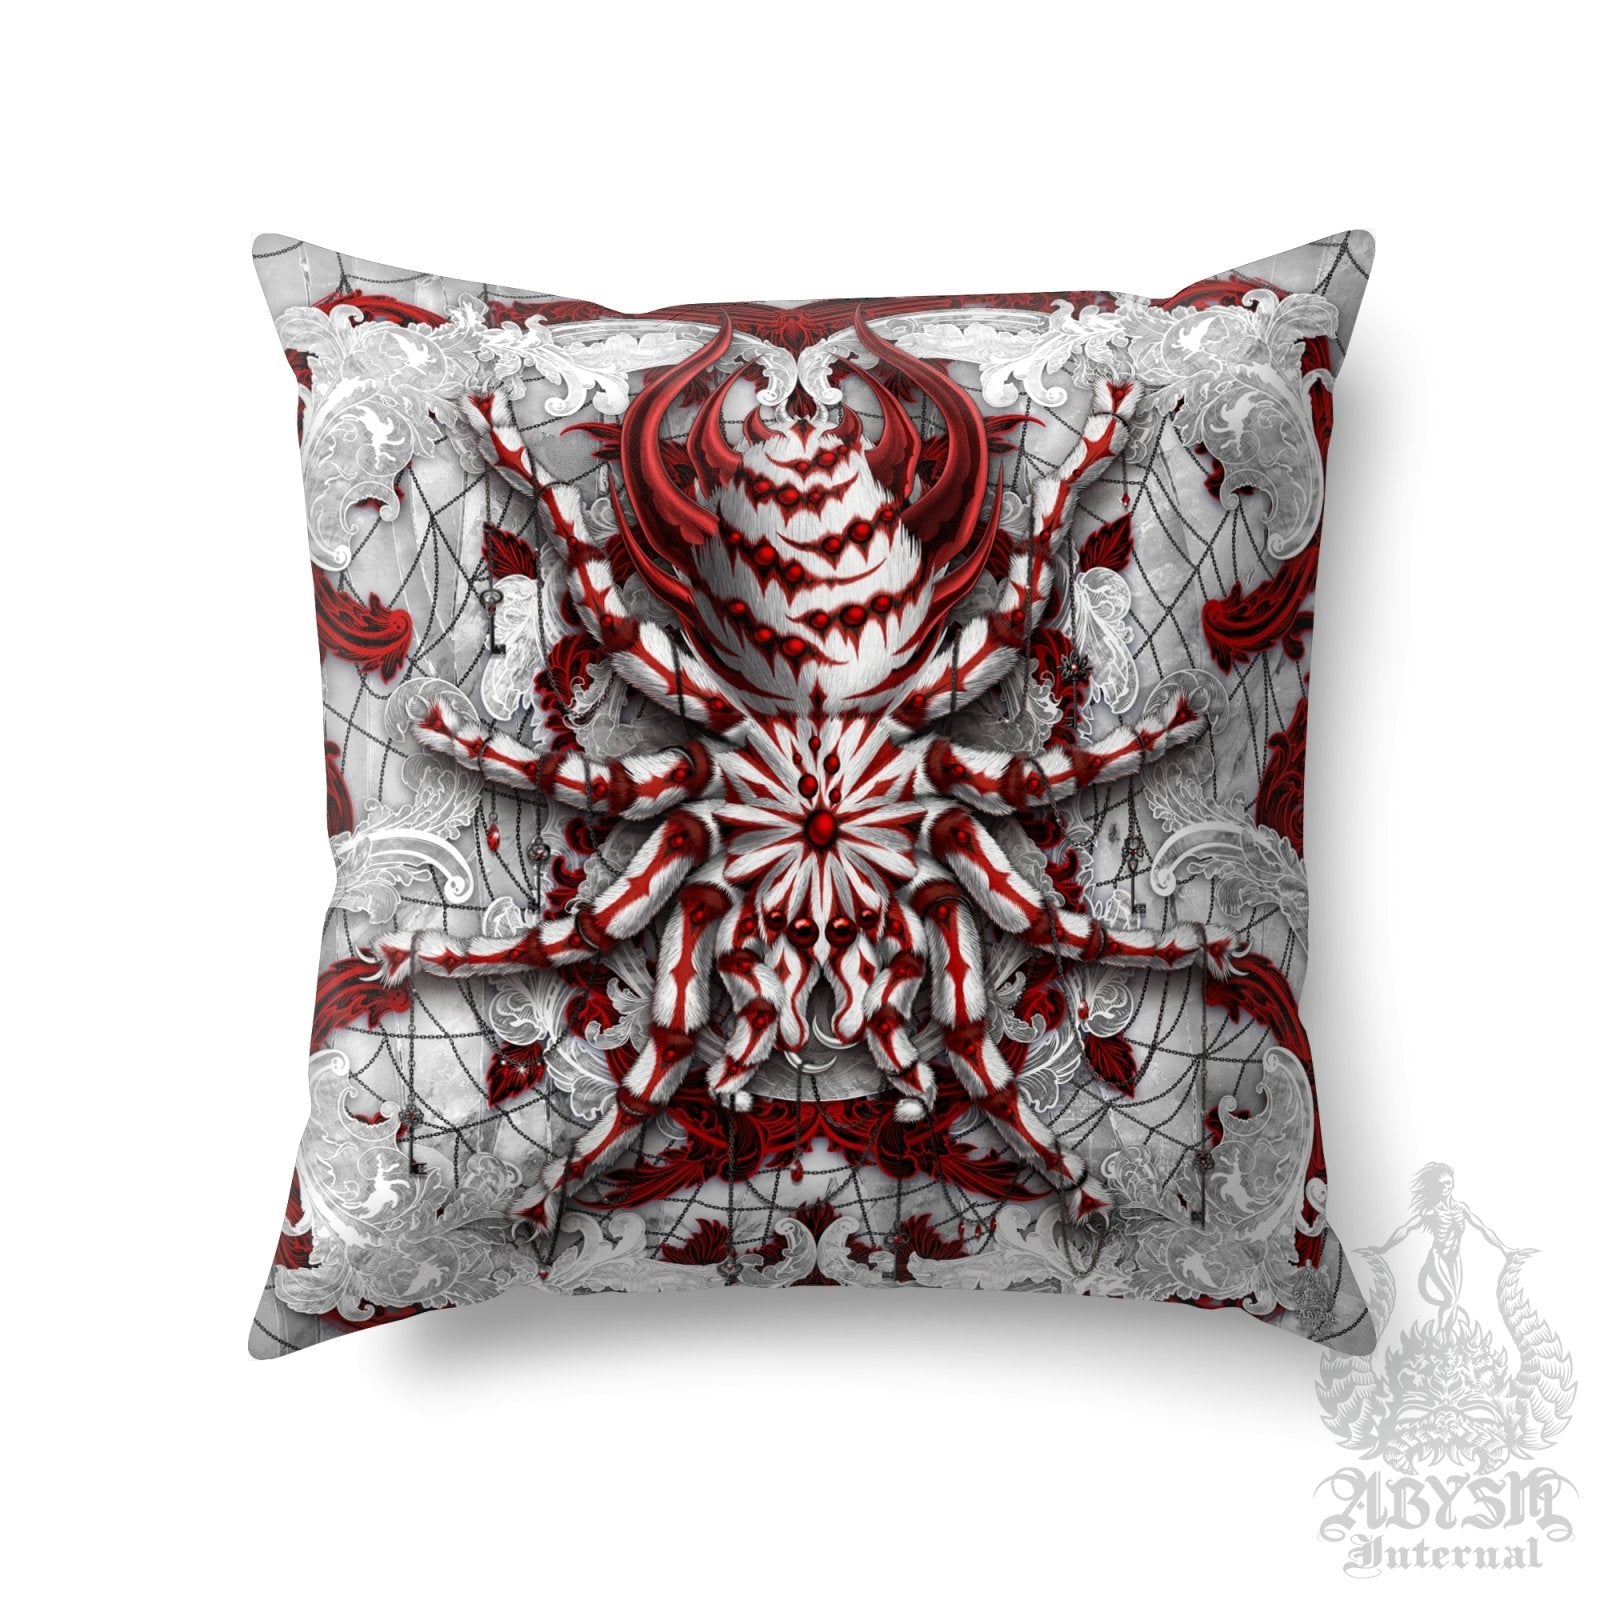 Surreal Pillow Case, Gothic Decor, Inmyeonjo - Oddities For Sale